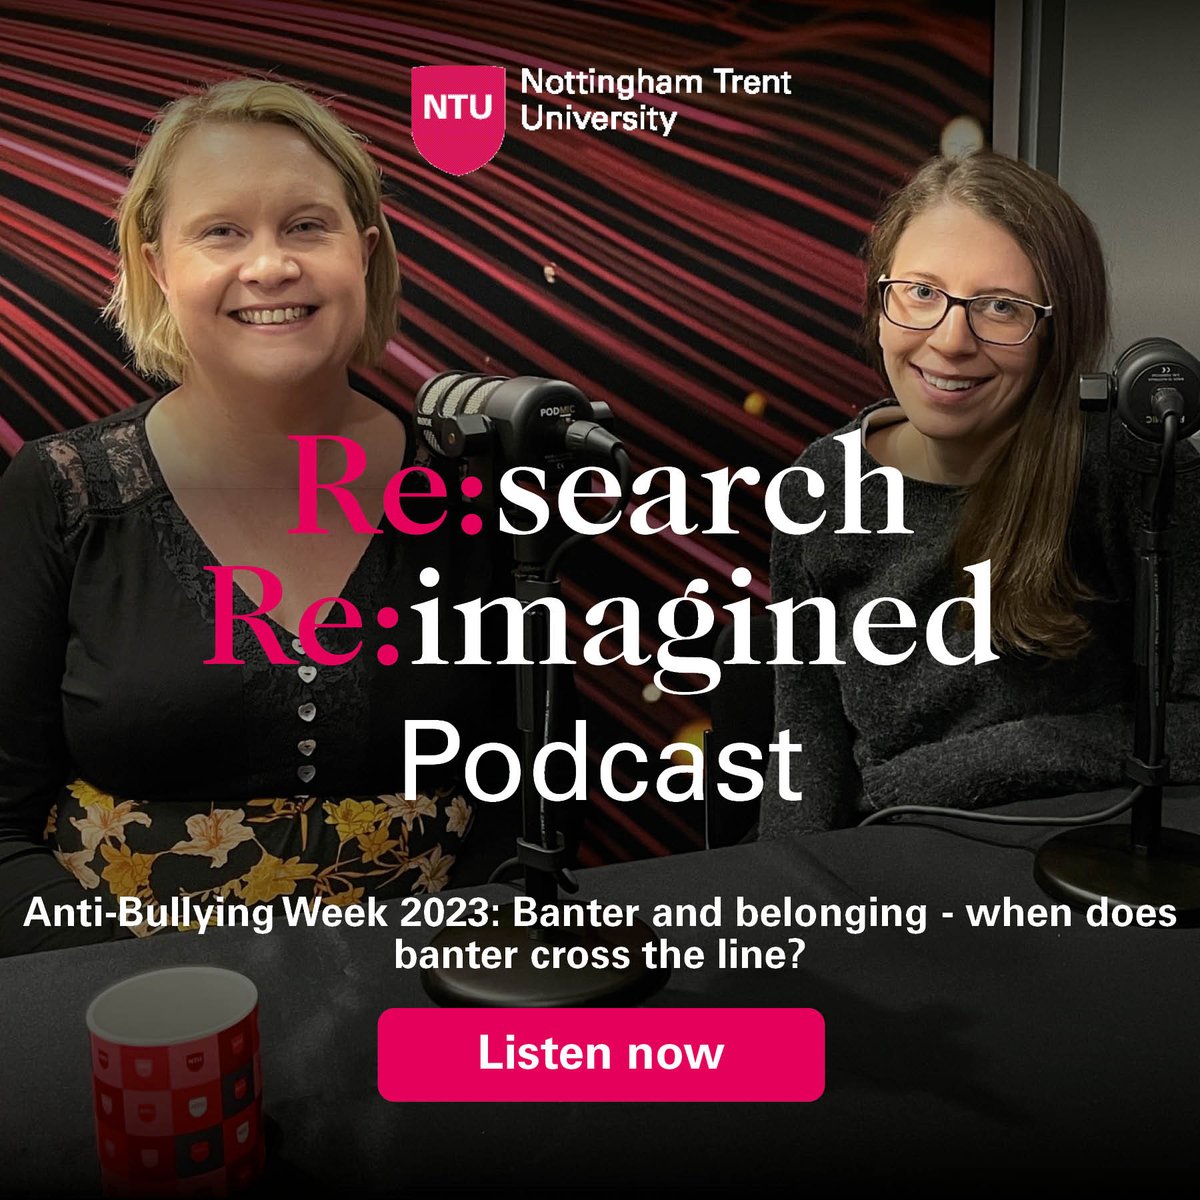 In the latest episode of the #ResearchReimagined podcast, we're joined by @sarah_buglass and @LorenAbell7, who discuss the power of banter to both unite and isolate, and the intricacies of social bonding in the university environment. Listen now 👉 ntu.ac.uk/research-podca…